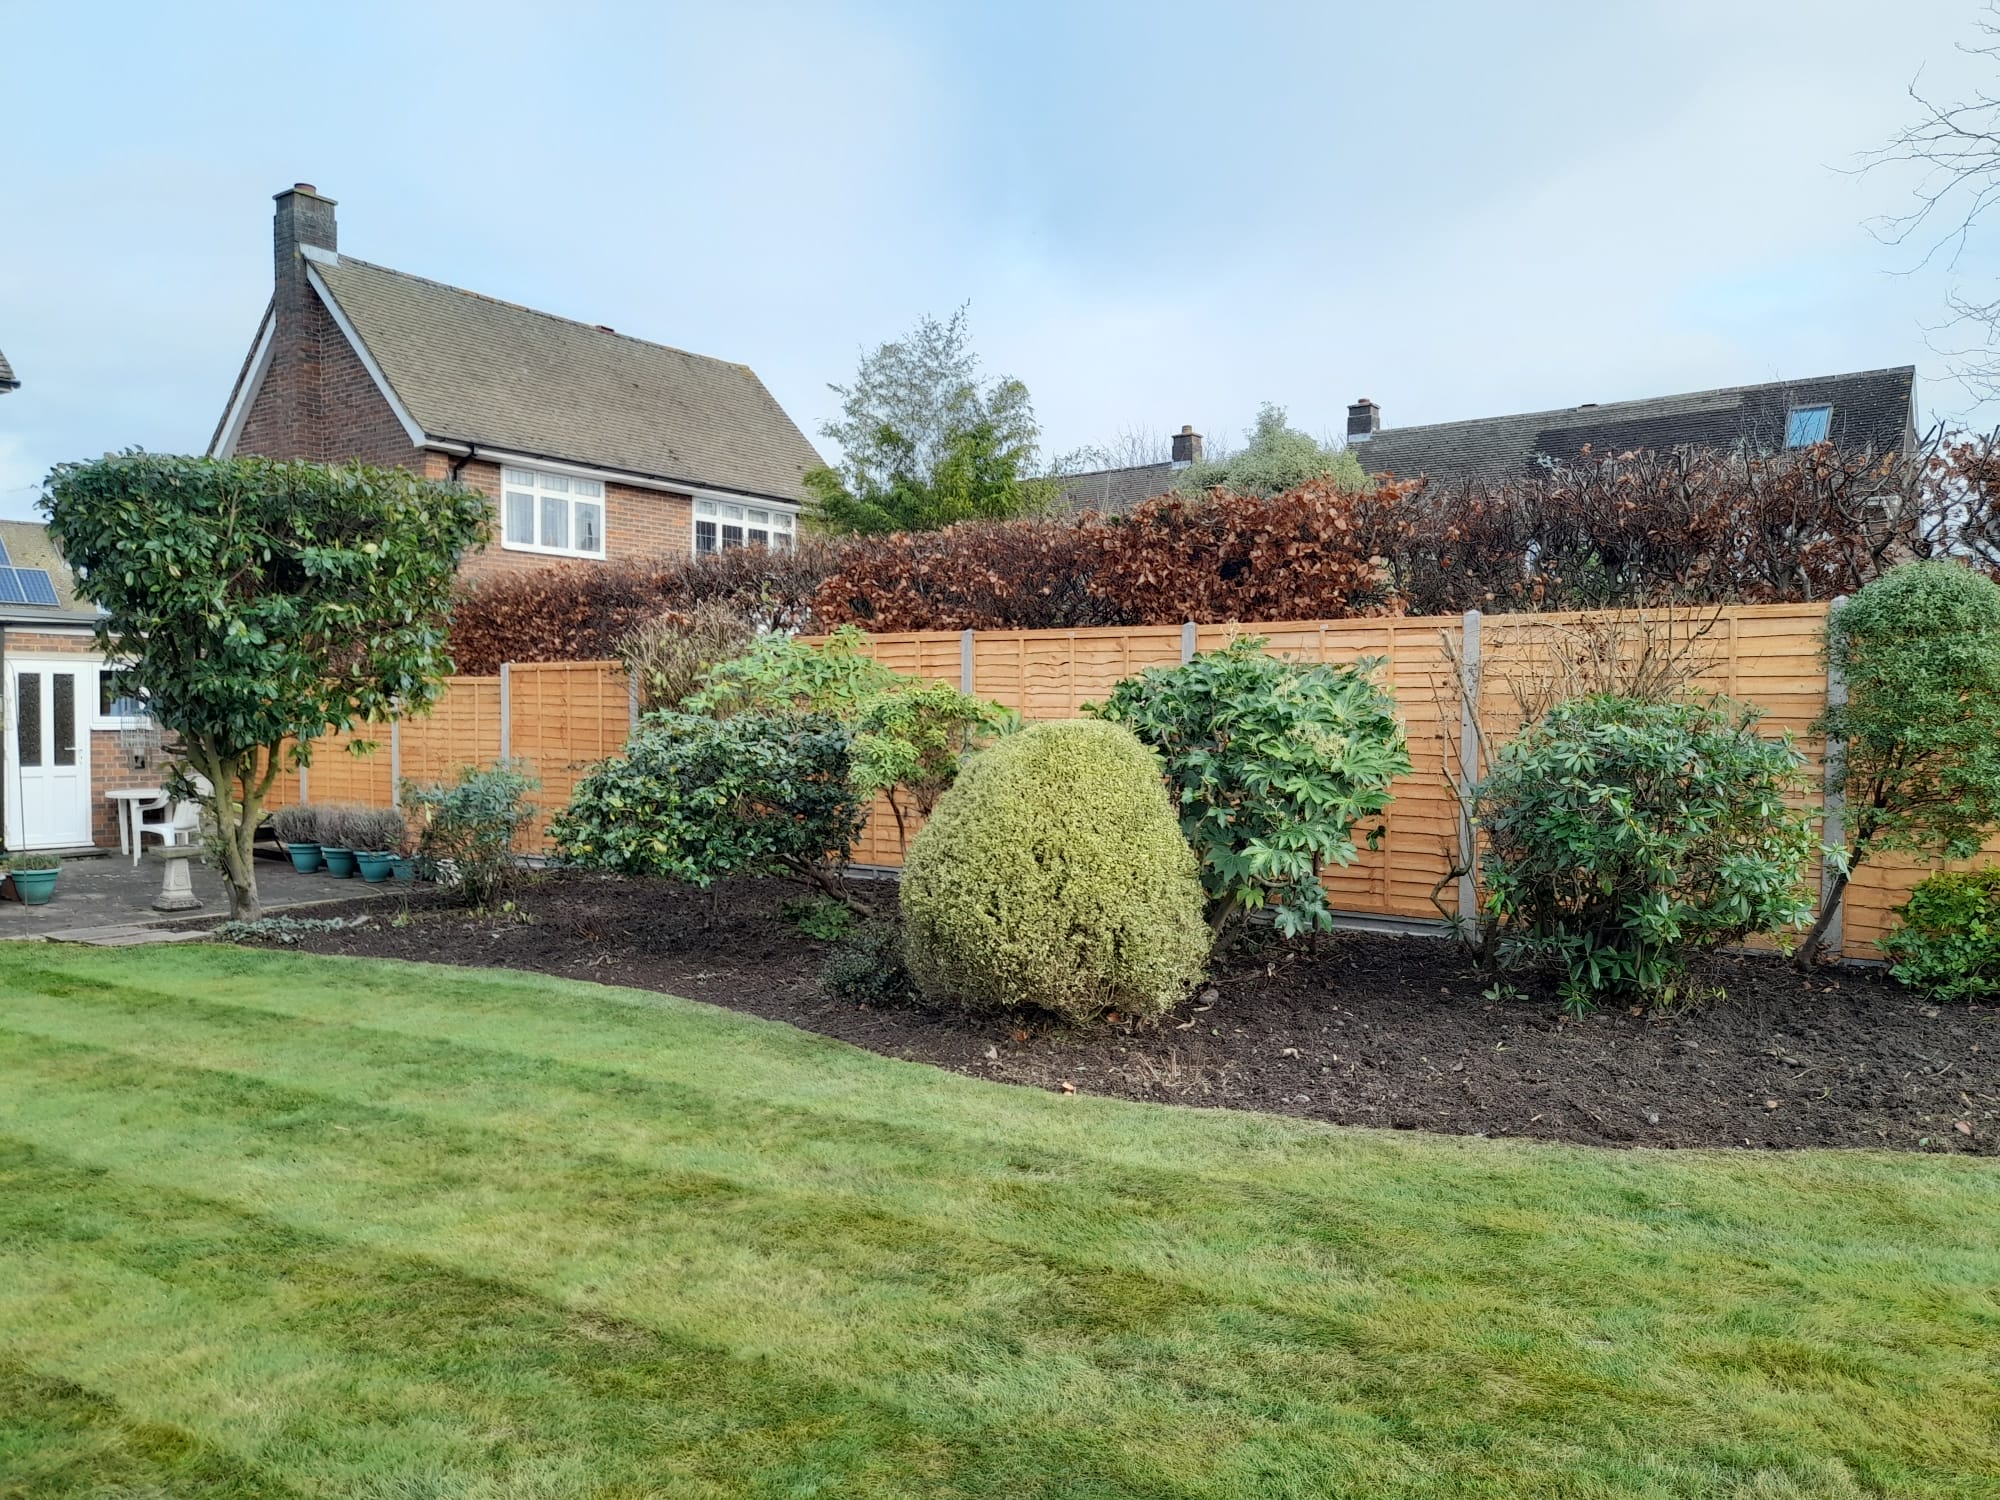 Shrubs neatly pruned, beds weeded and turned over, lawn mowed and edged, new fence erected.